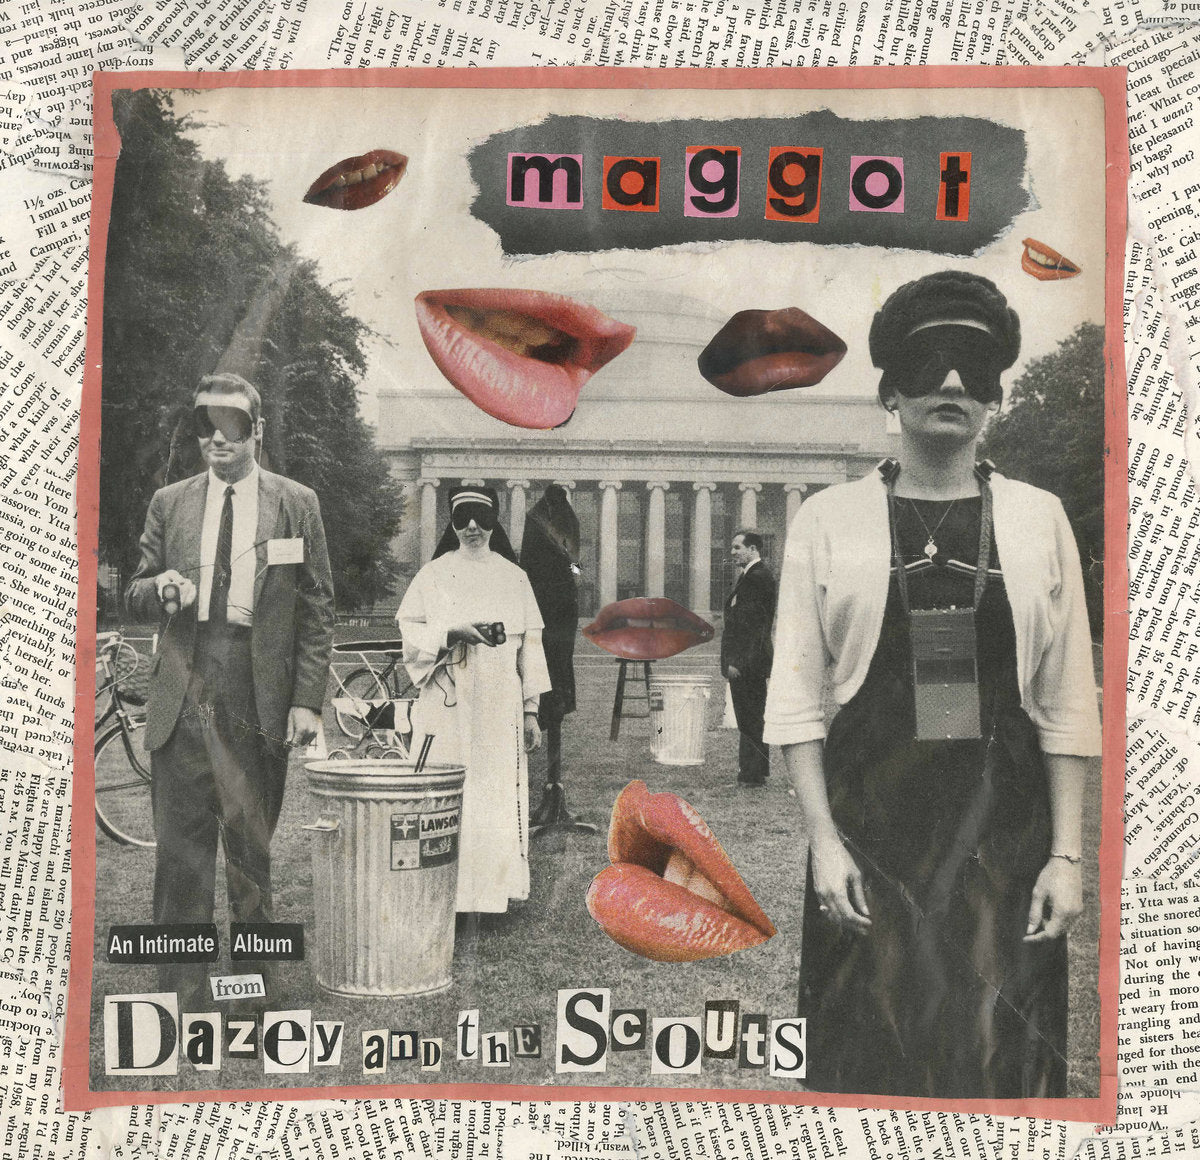 Dazey and The Scouts - 'Maggot'